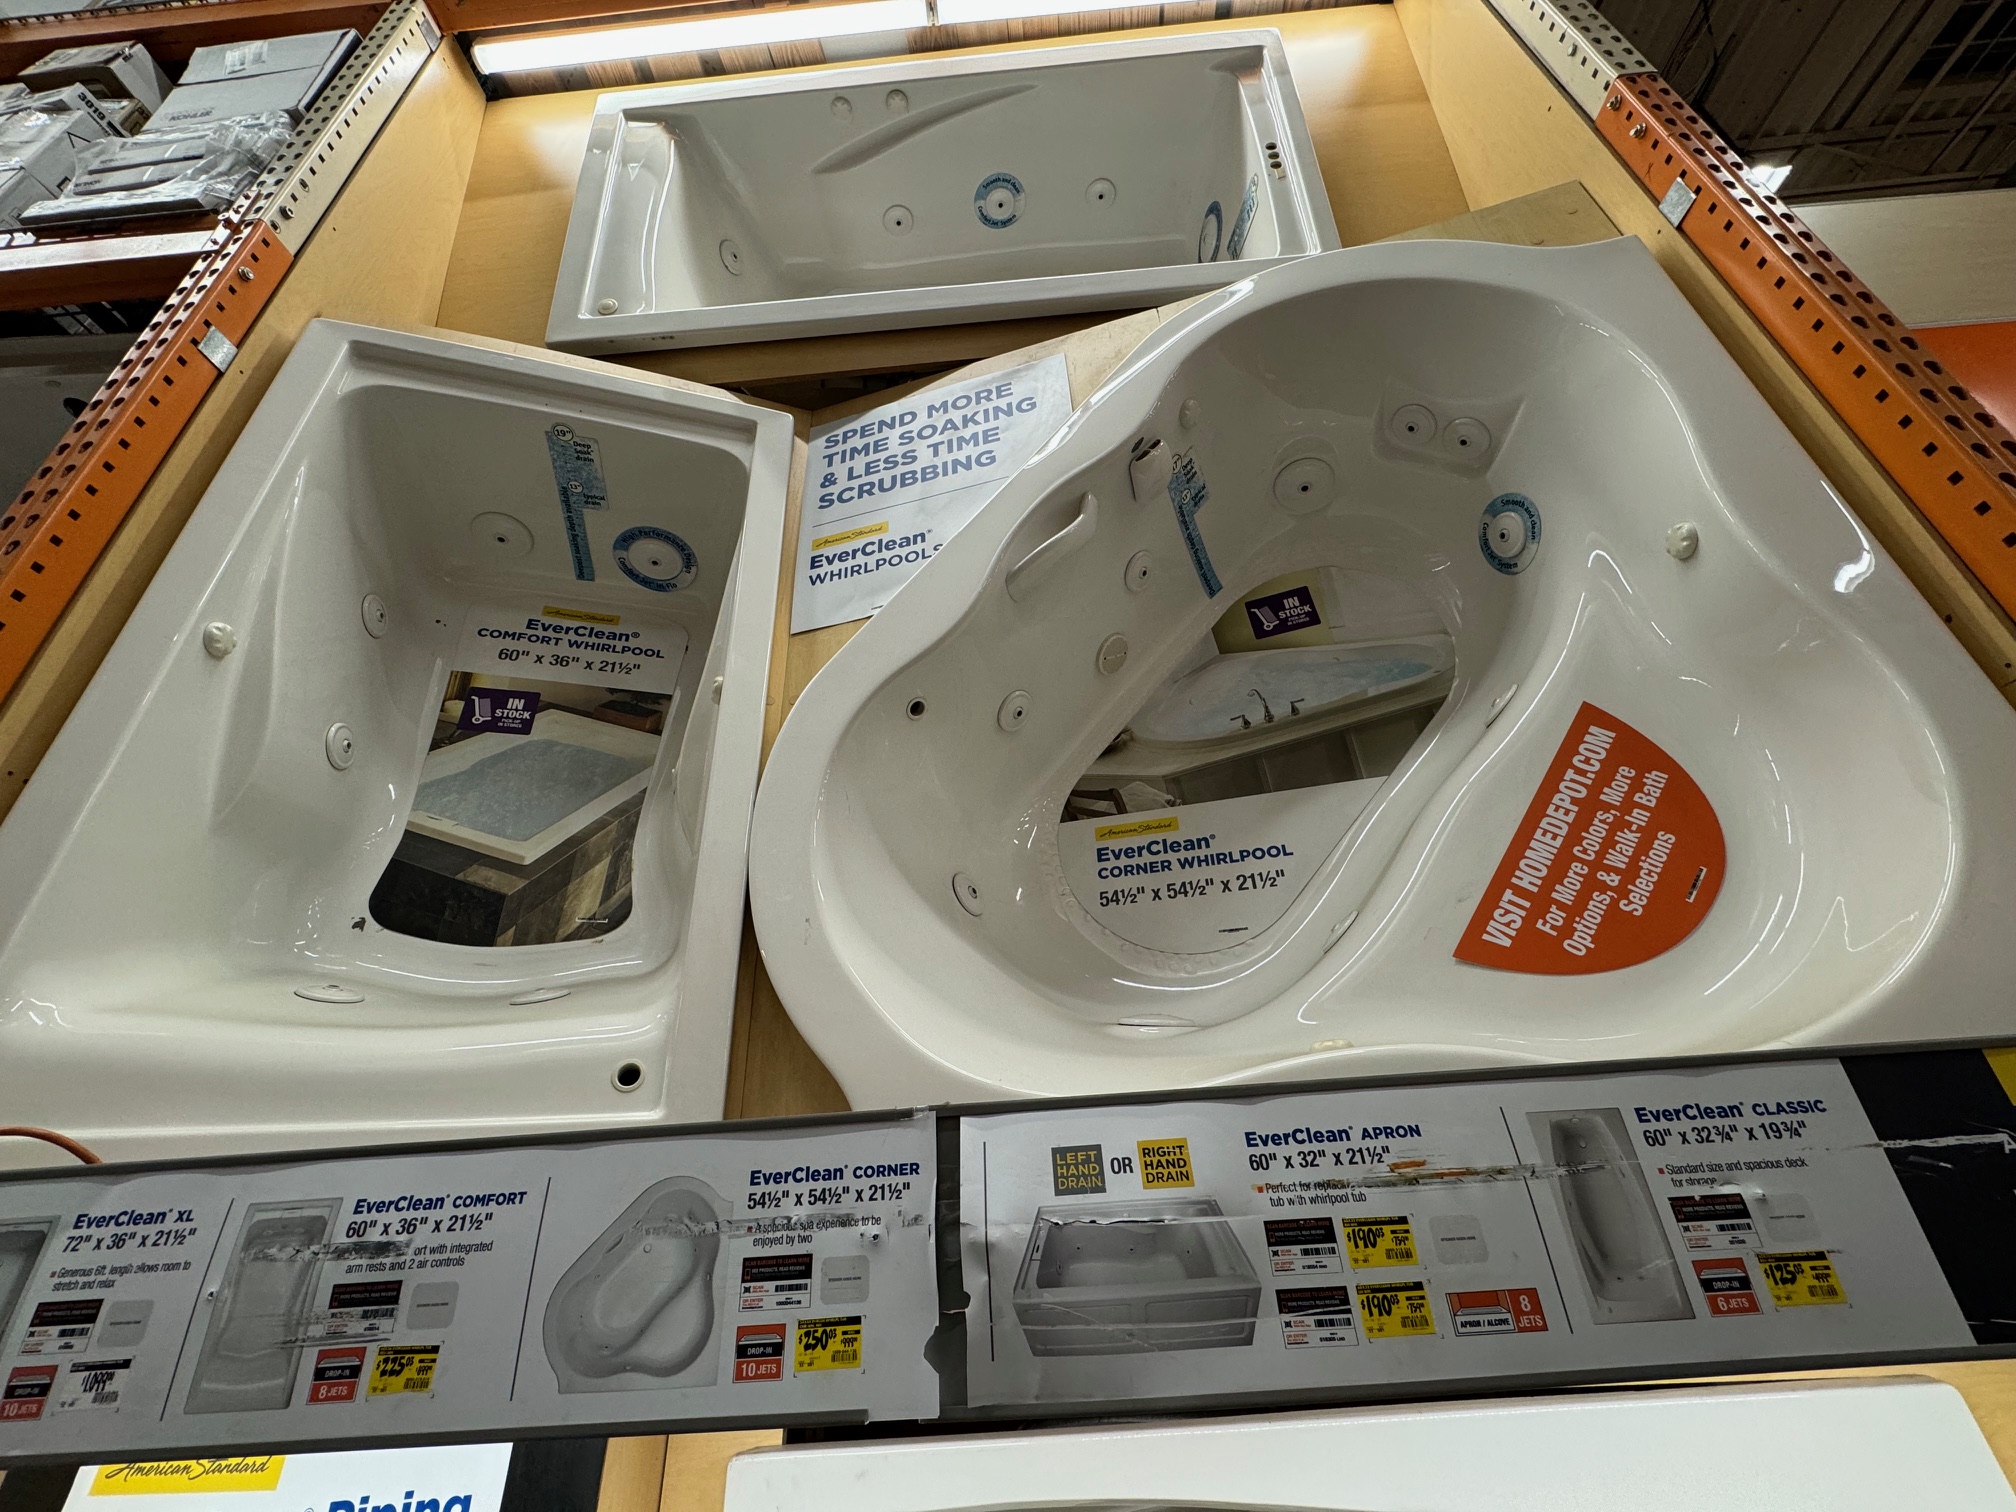 Home Depot YMMV Whirlpool and soaking tubs 75 % off in store $250 Everclean corner 54 1/2 x 54 1/2 x 21 1/2